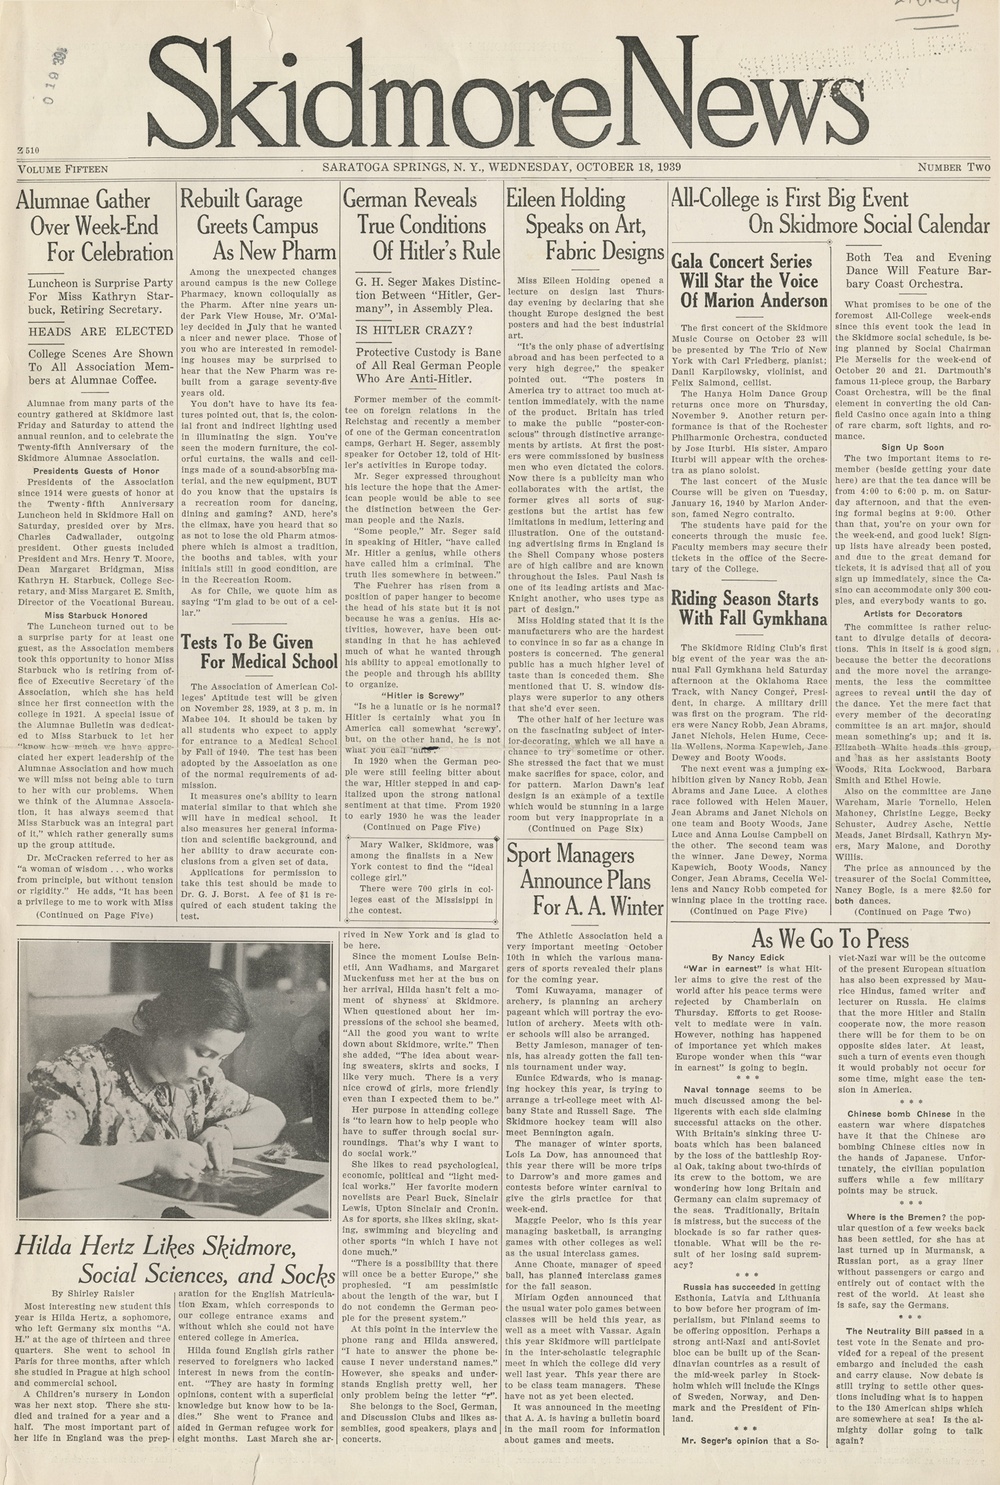   The yellowed front page of the Skidmore News features several columns of small-print text with a black and white photograph of a young light-skinned woman in the bottom left page. 